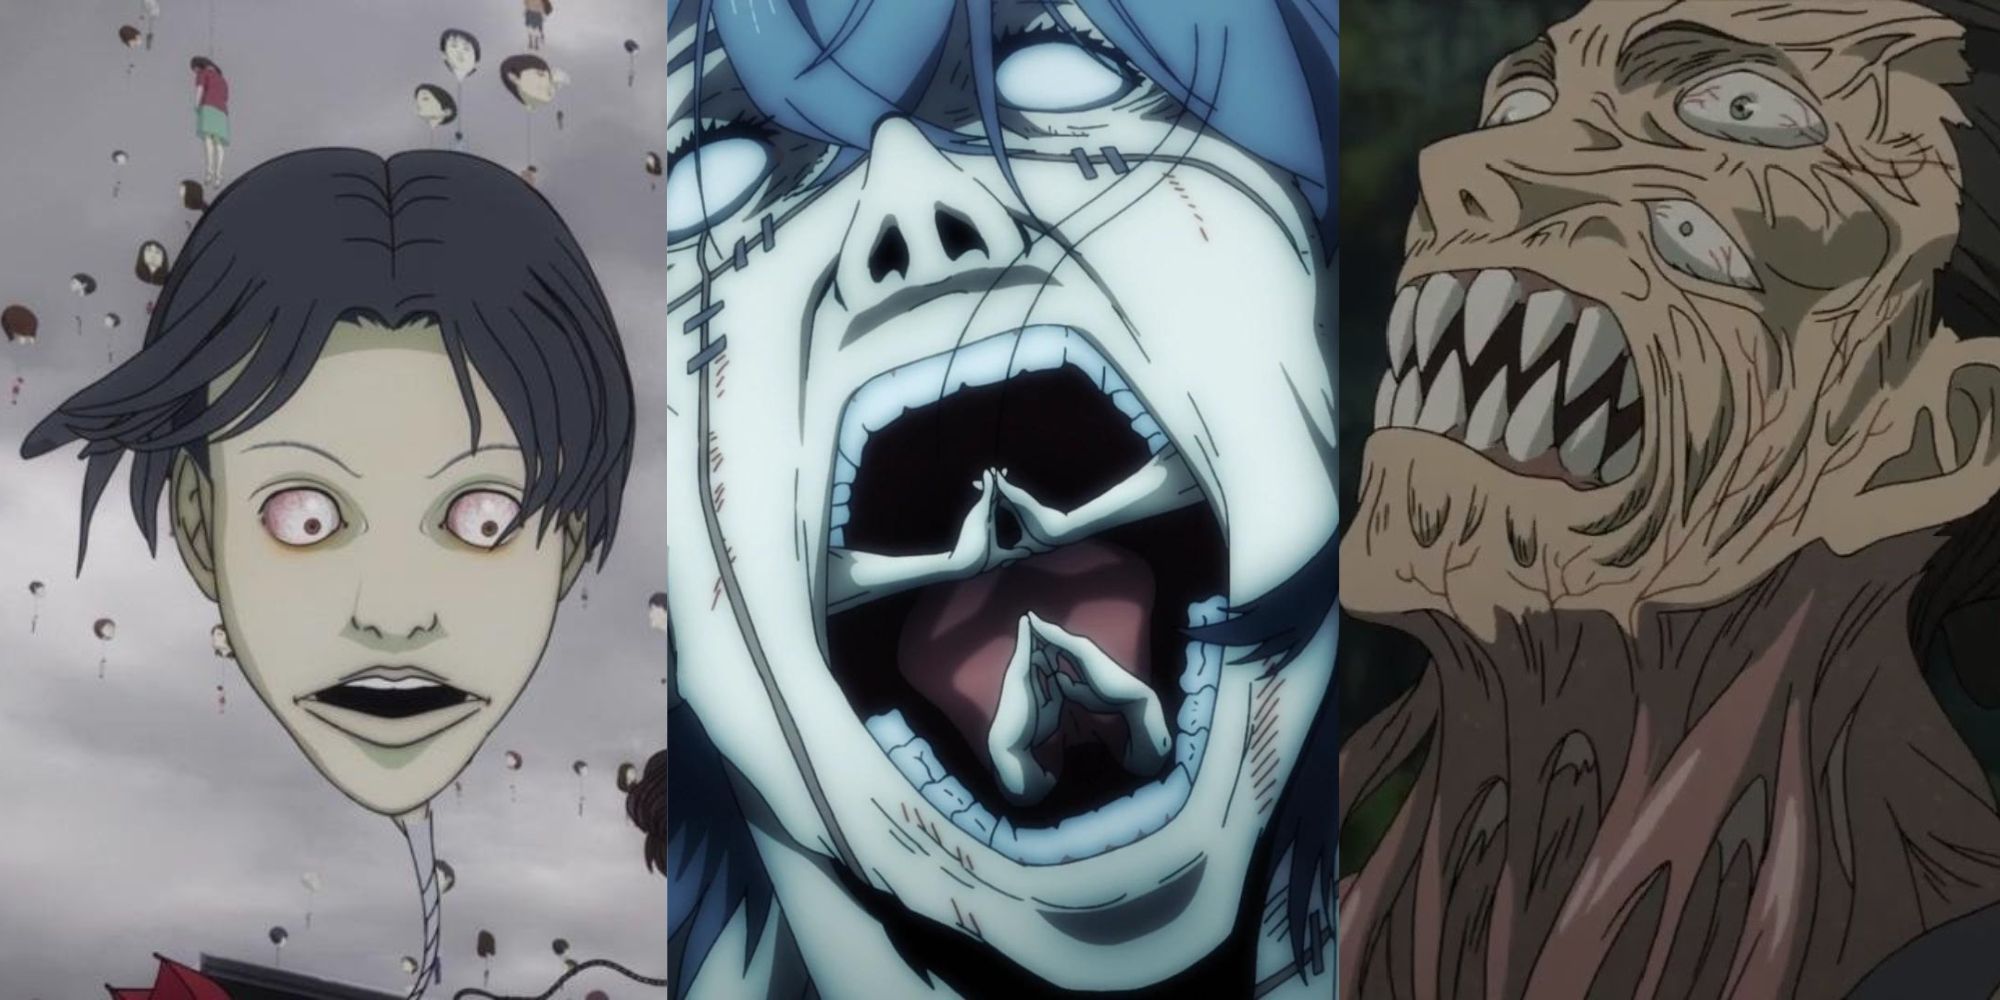 20 Horror Anime That Will Make You Wish You'd Never Watched Them - GameSpot-demhanvico.com.vn